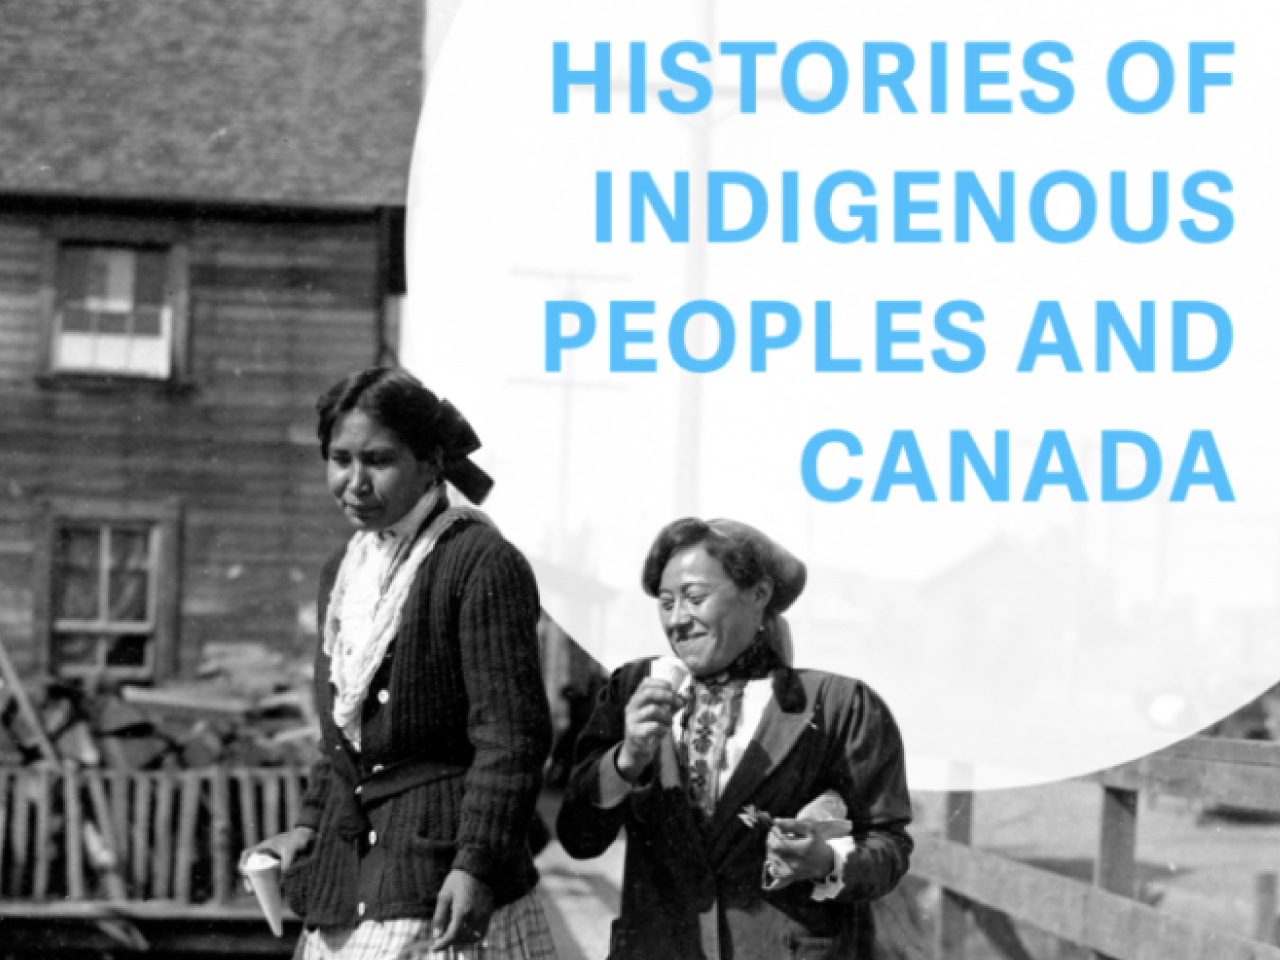 Histories of Indigenous peoples and Canada